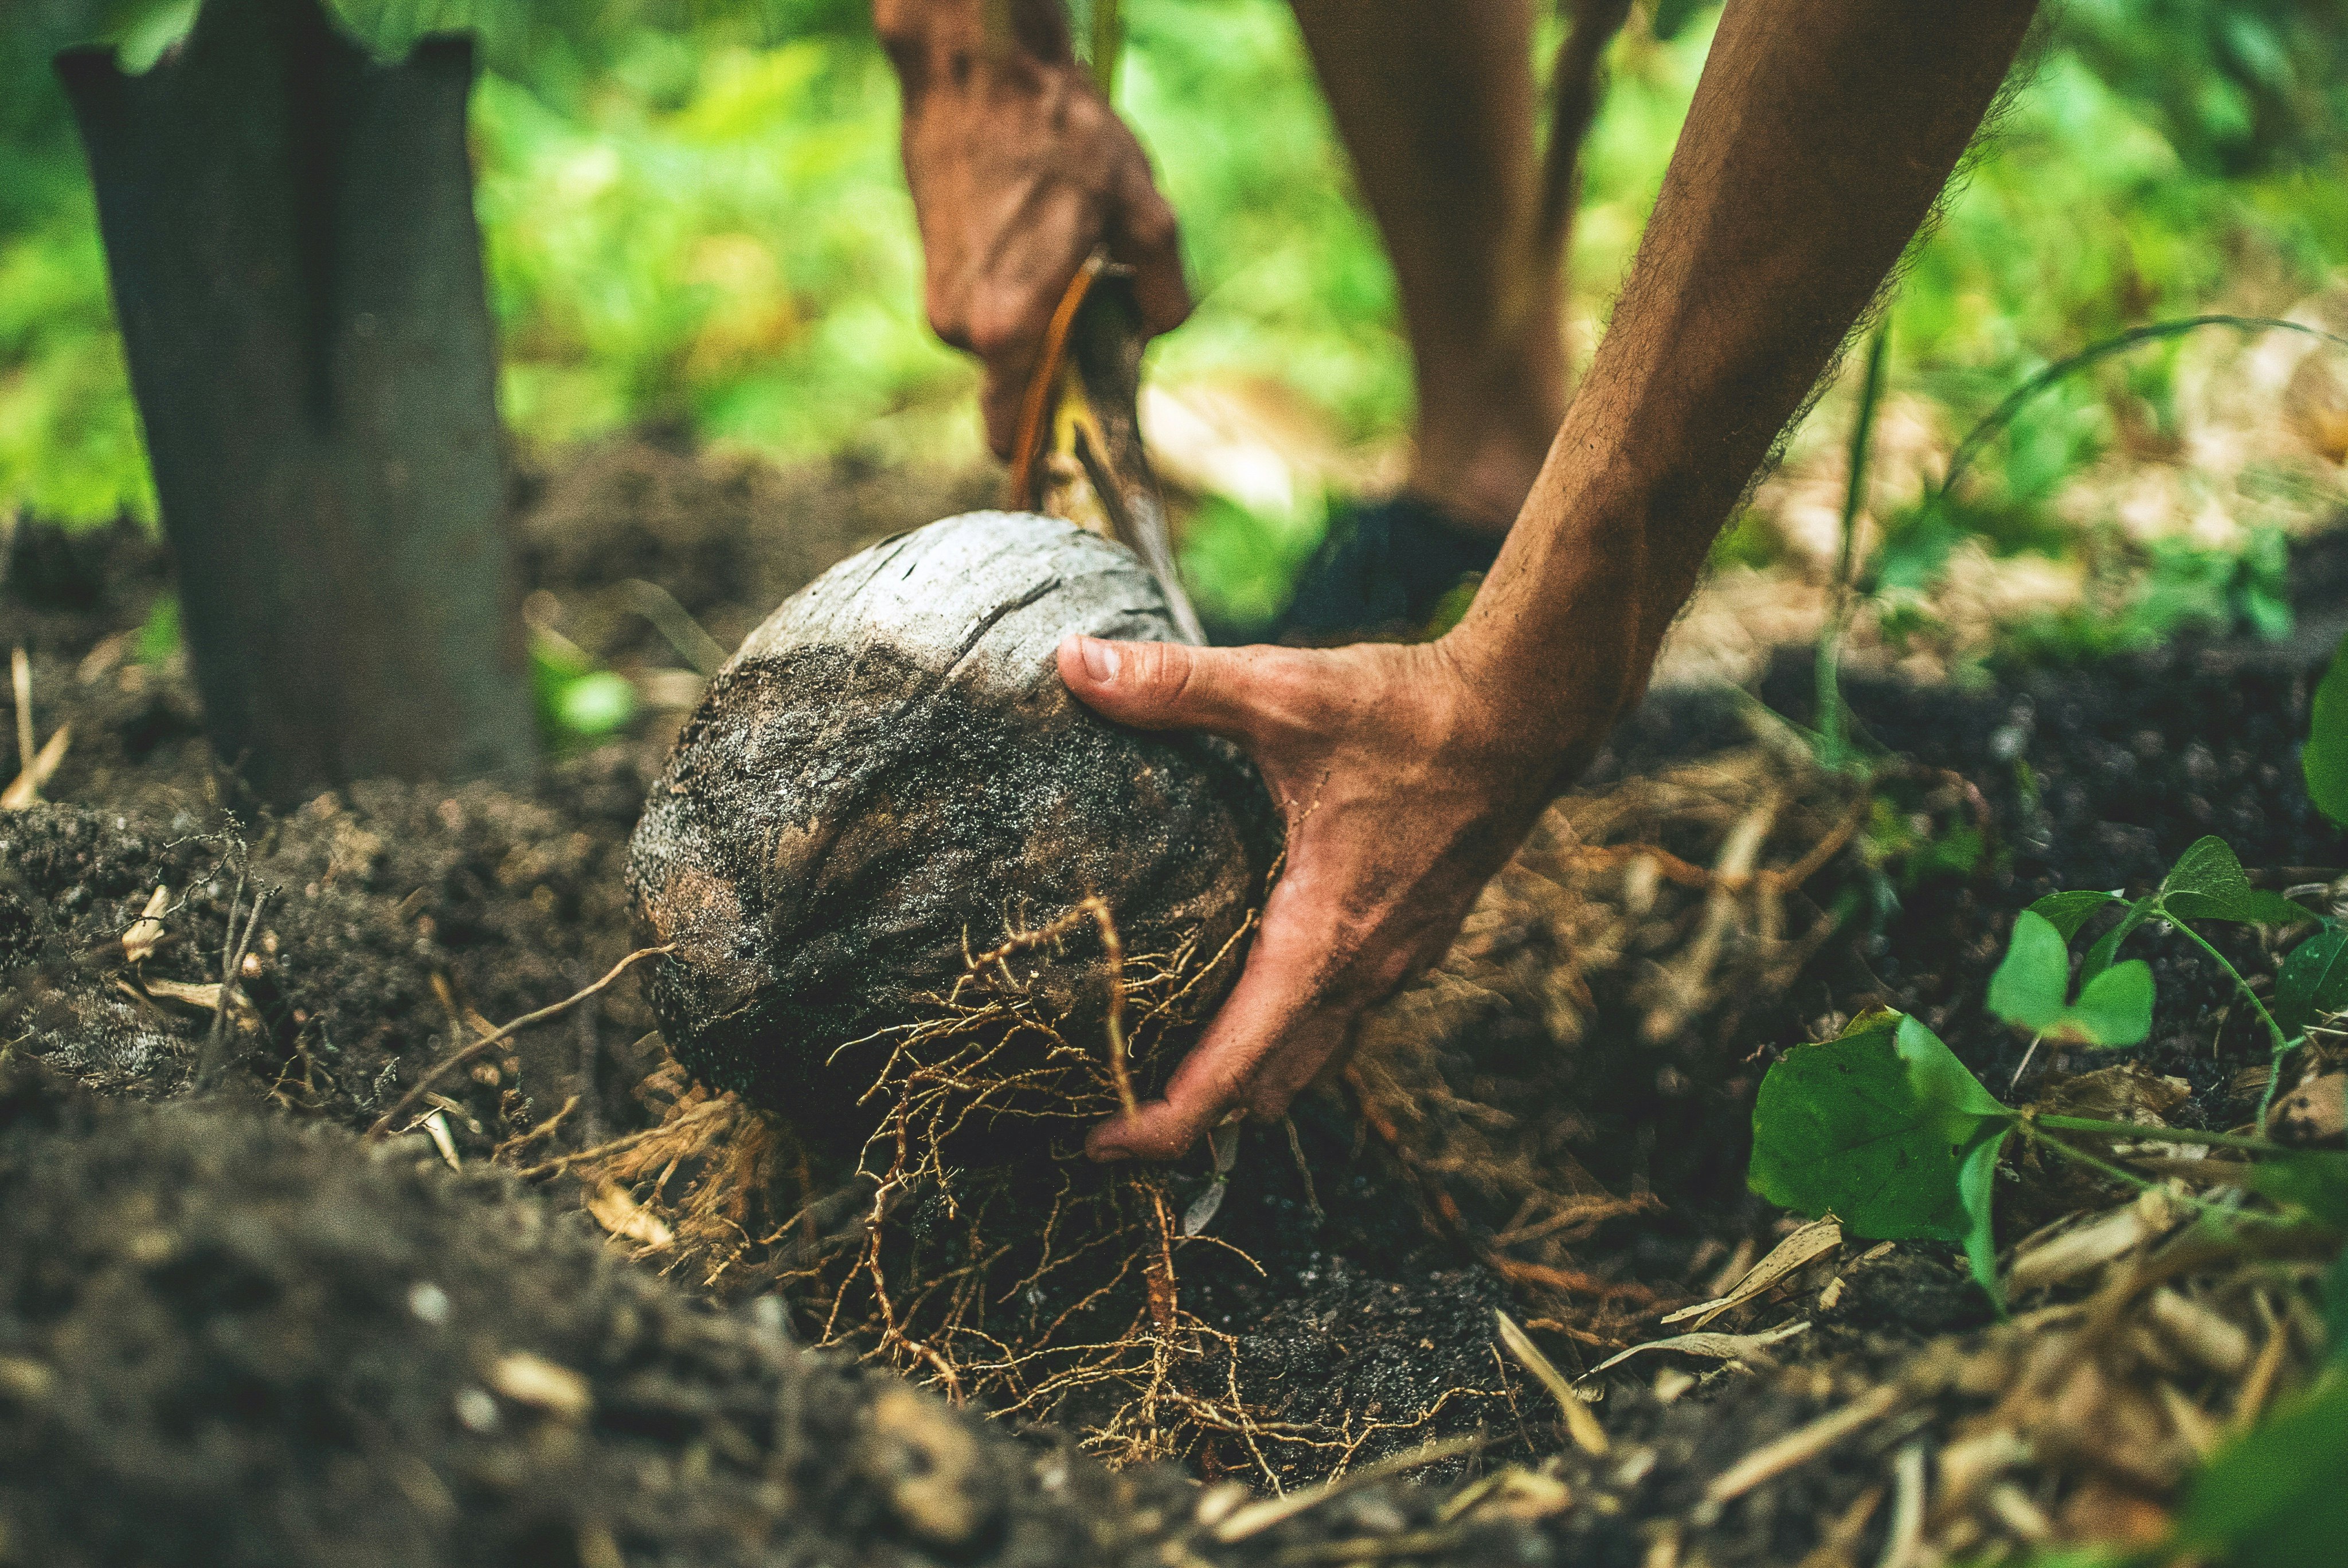 Field worker digs up a coconut from the forest floor